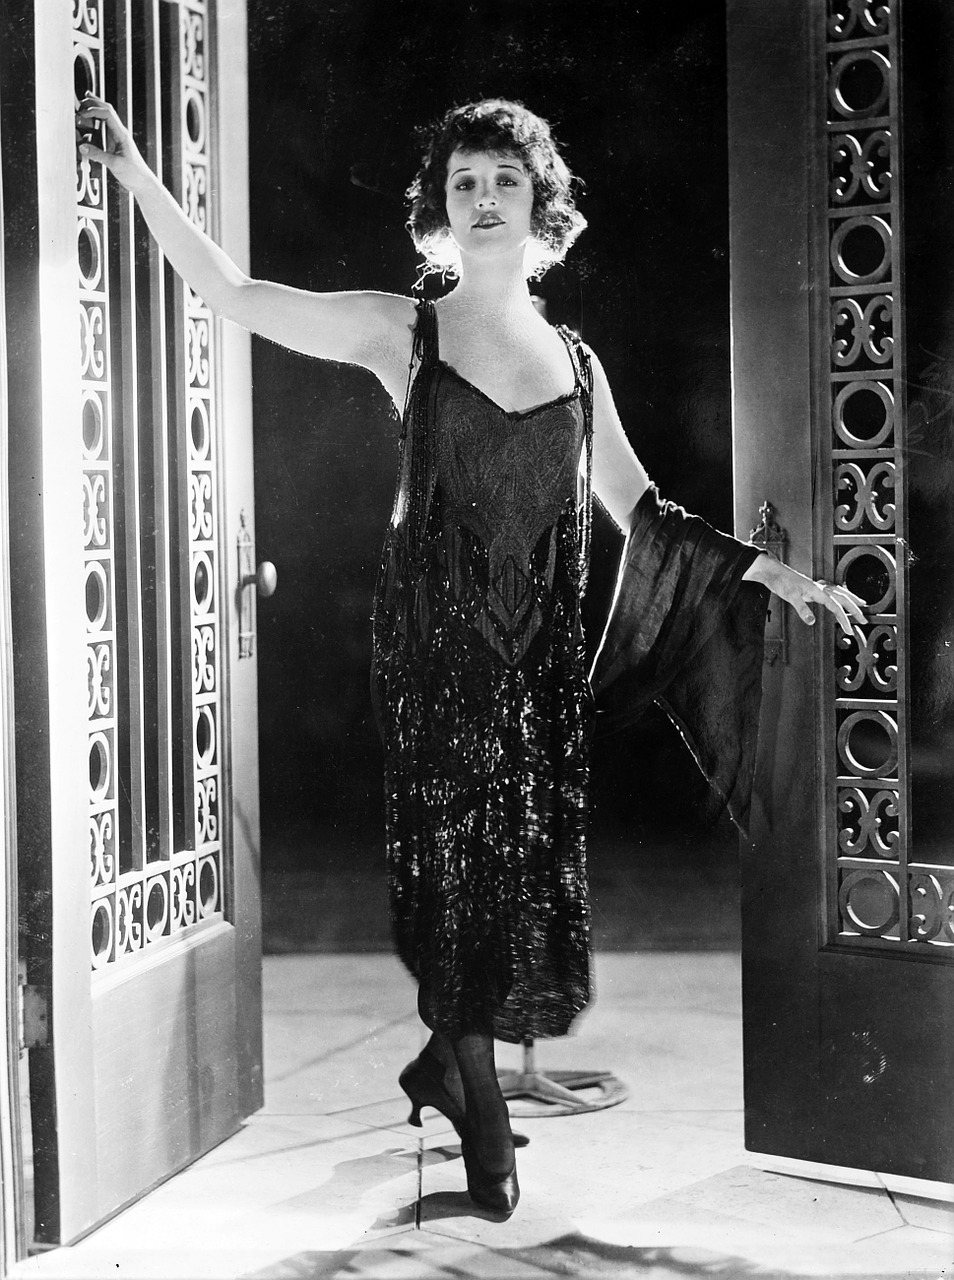 Betty Compson Actress Films Silent Talkies Free Image From Needpix Com